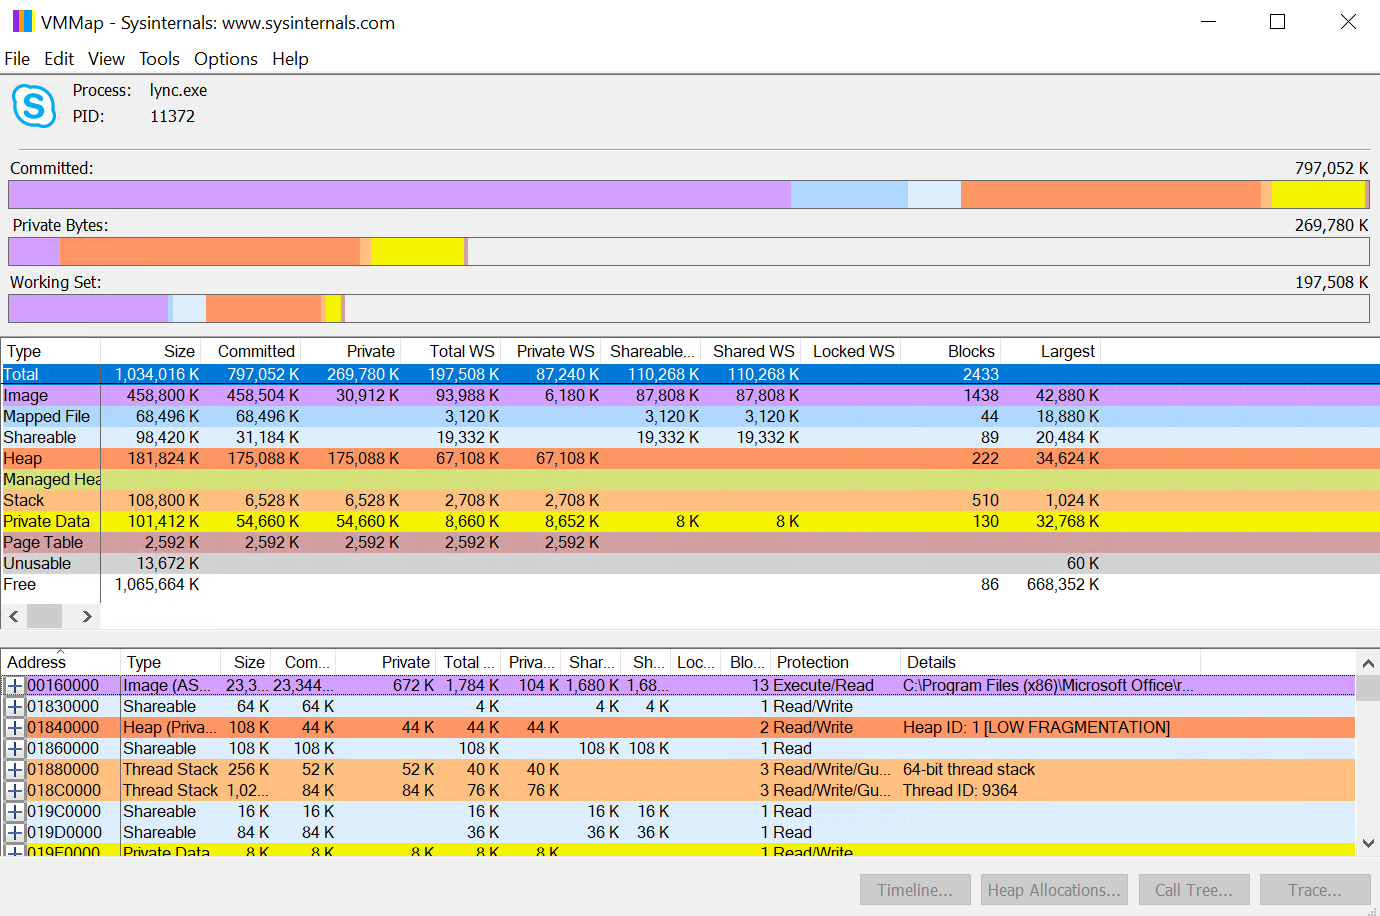 Screenshot that shows the multi-colored representation of the memory profile.